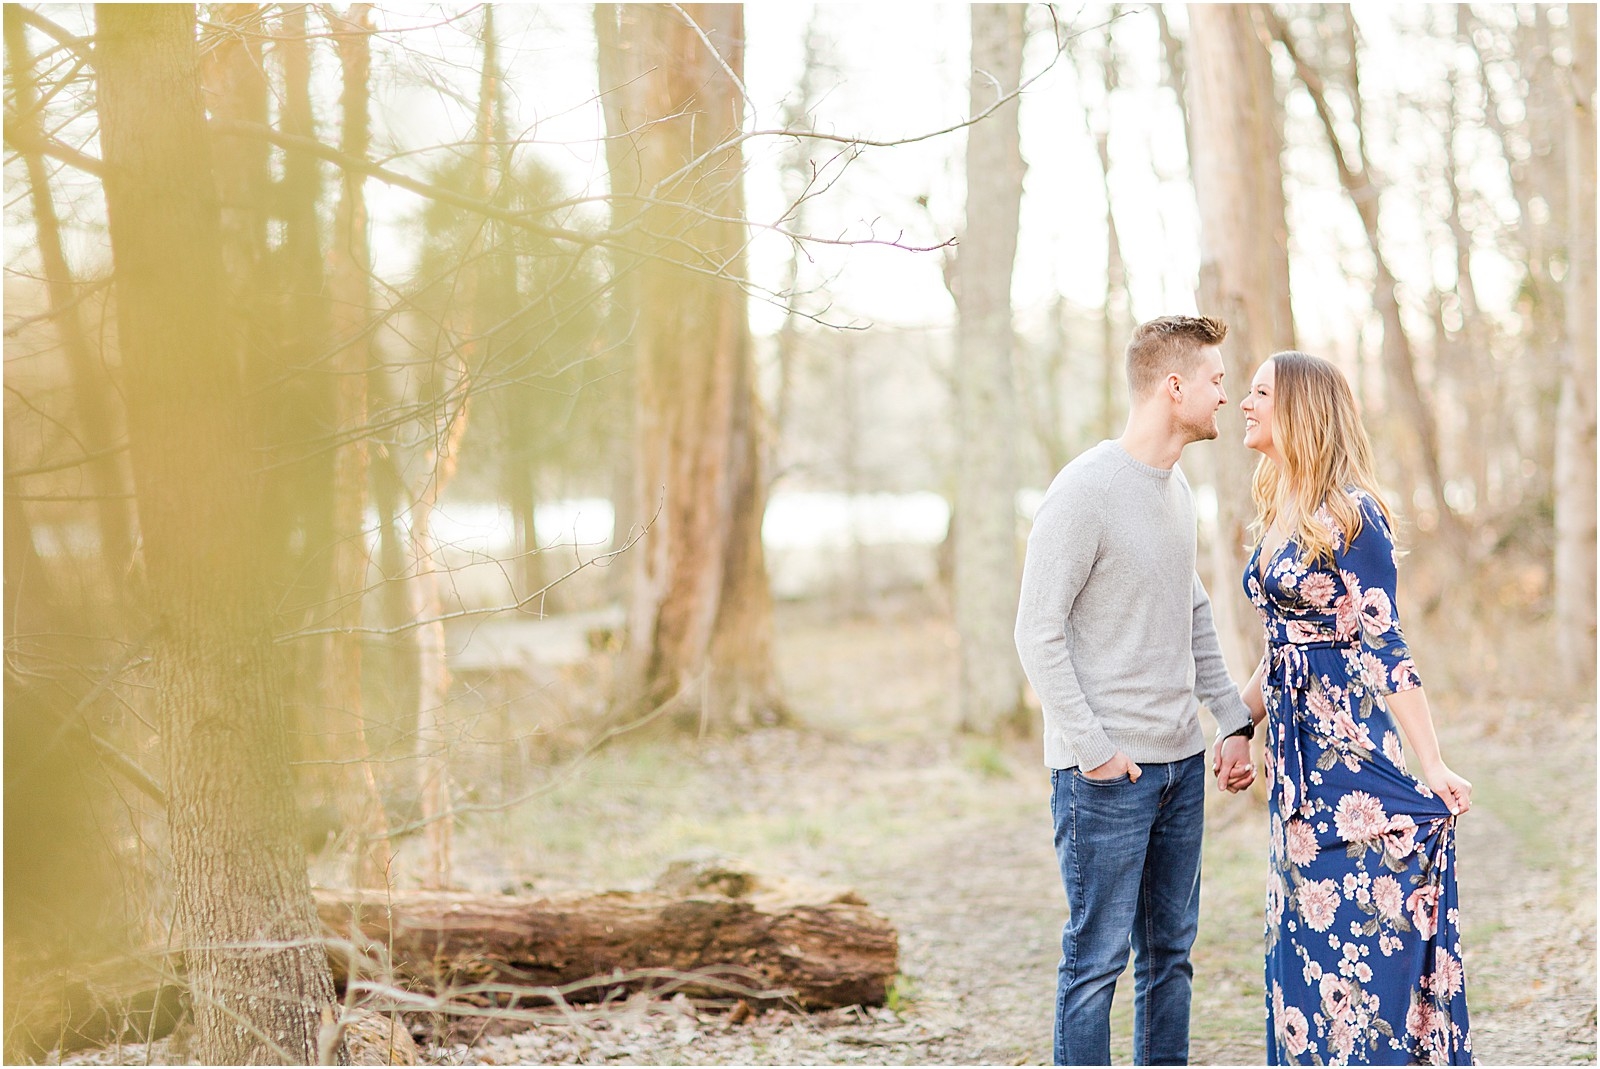 Rachel and Nick | Lincoln State Park Engagement Session 014.jpg